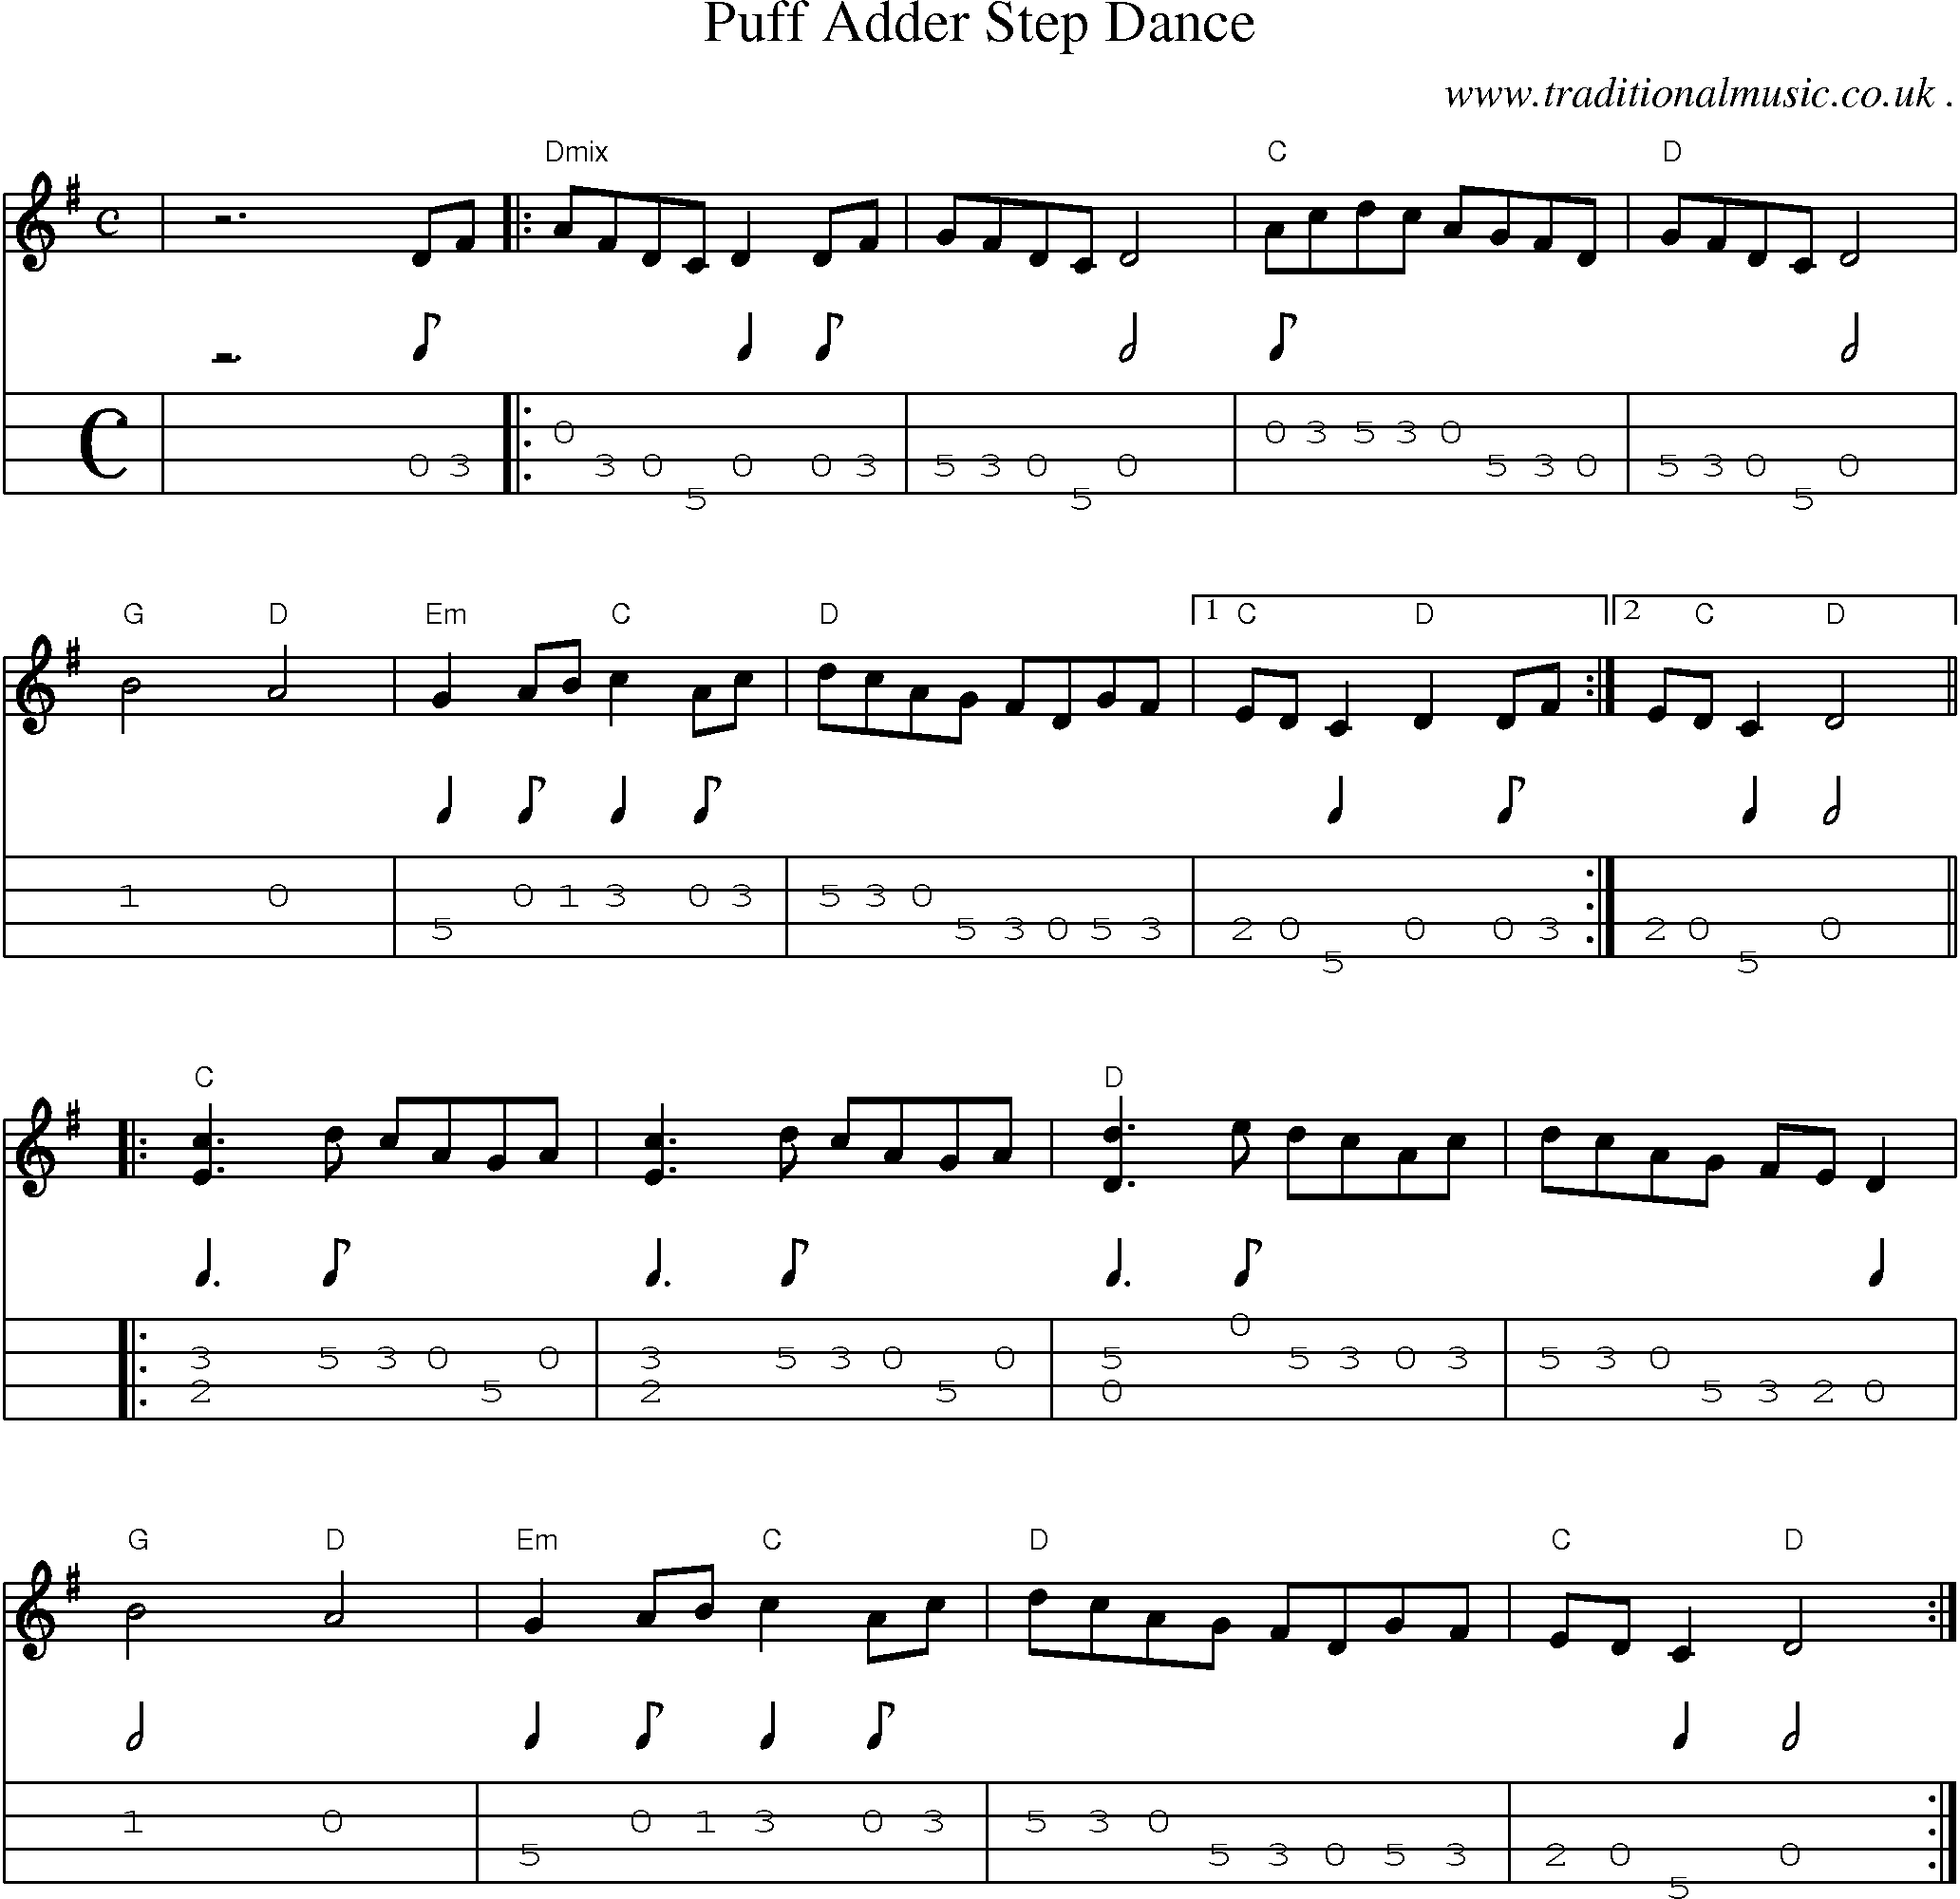 Music Score and Guitar Tabs for Puff Adder Step Dance